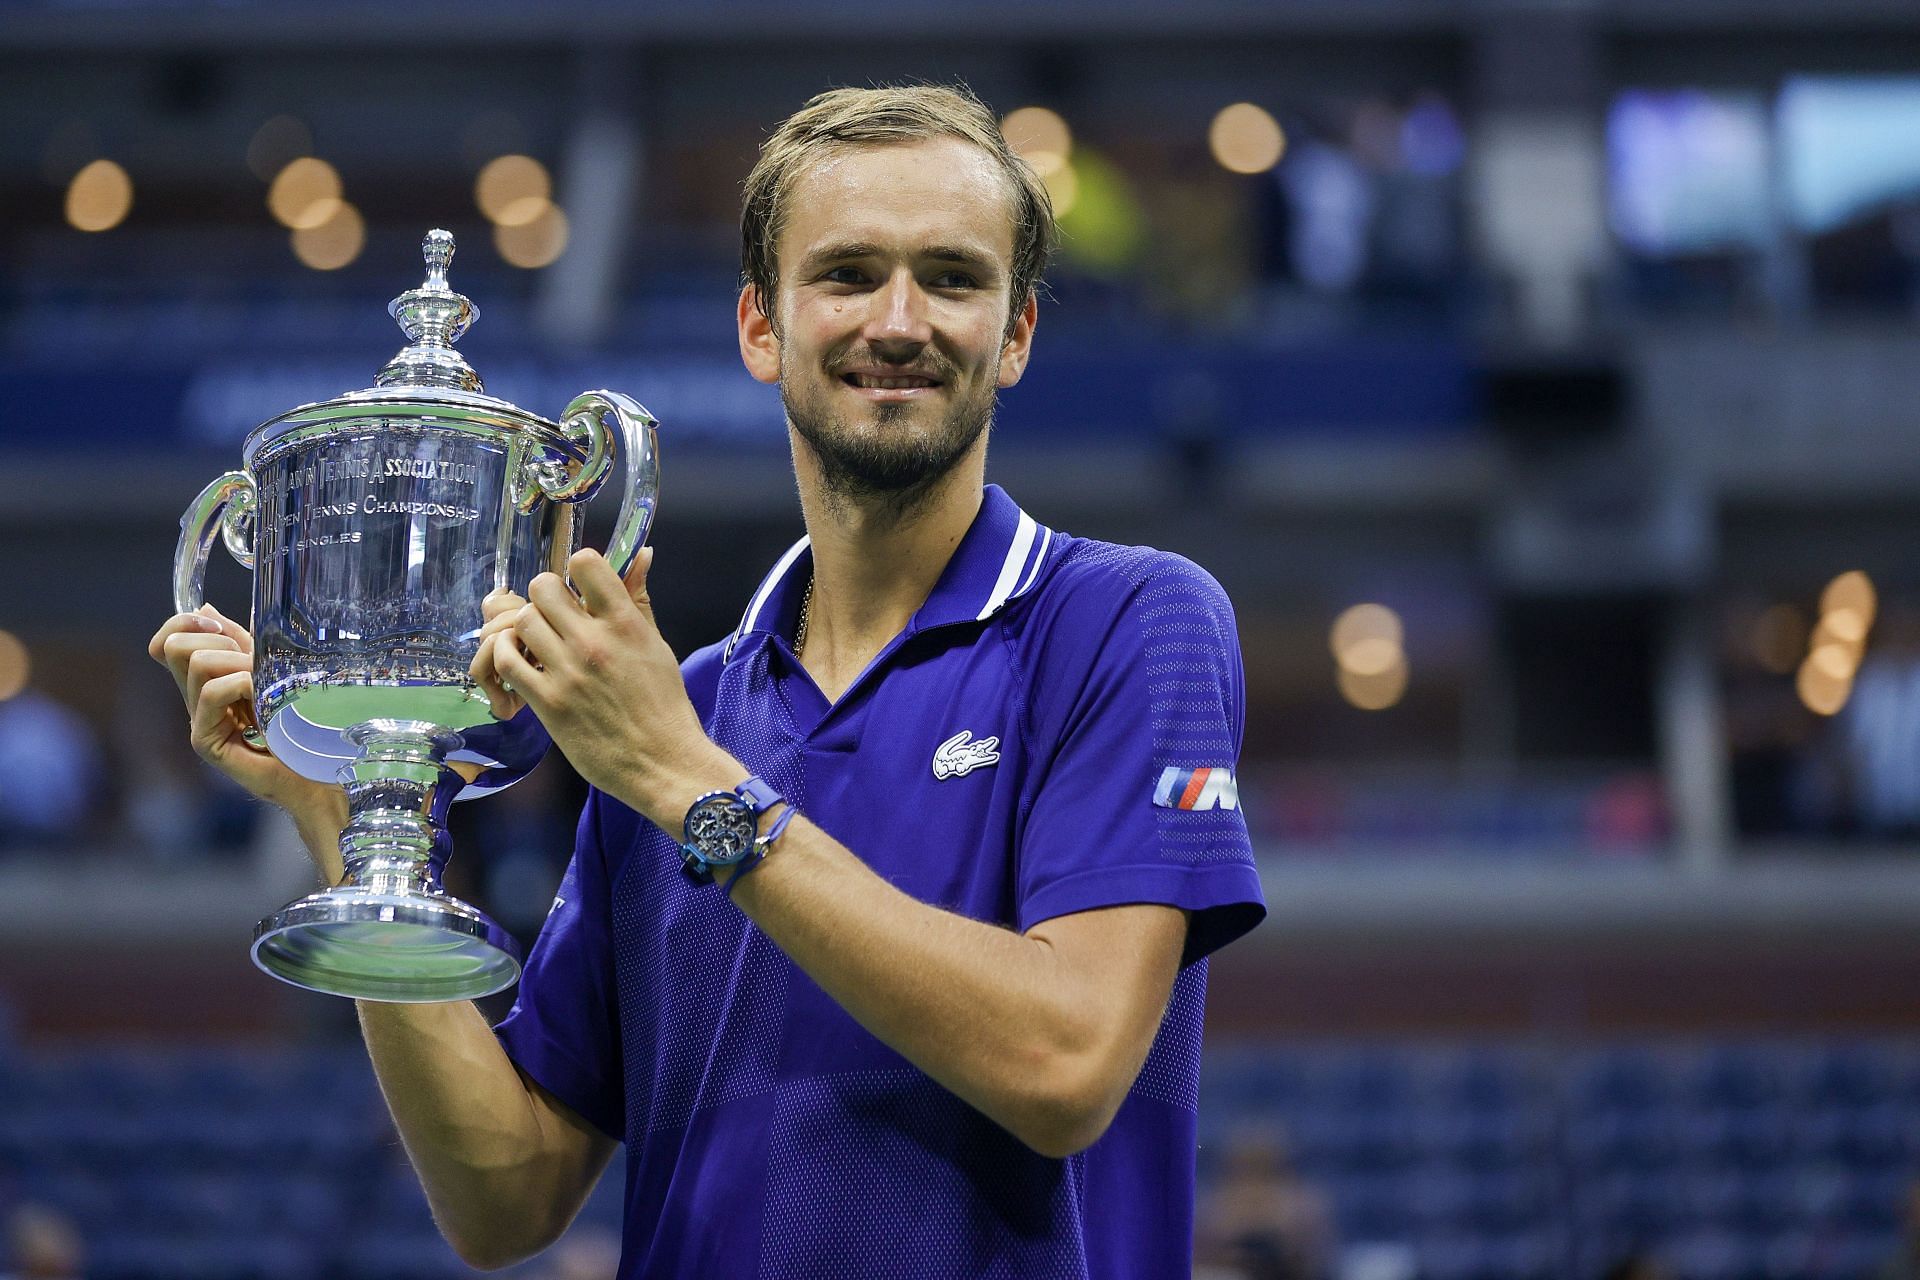 Daniil Medvedev won his first Grand Slam at the 2021 US Open.